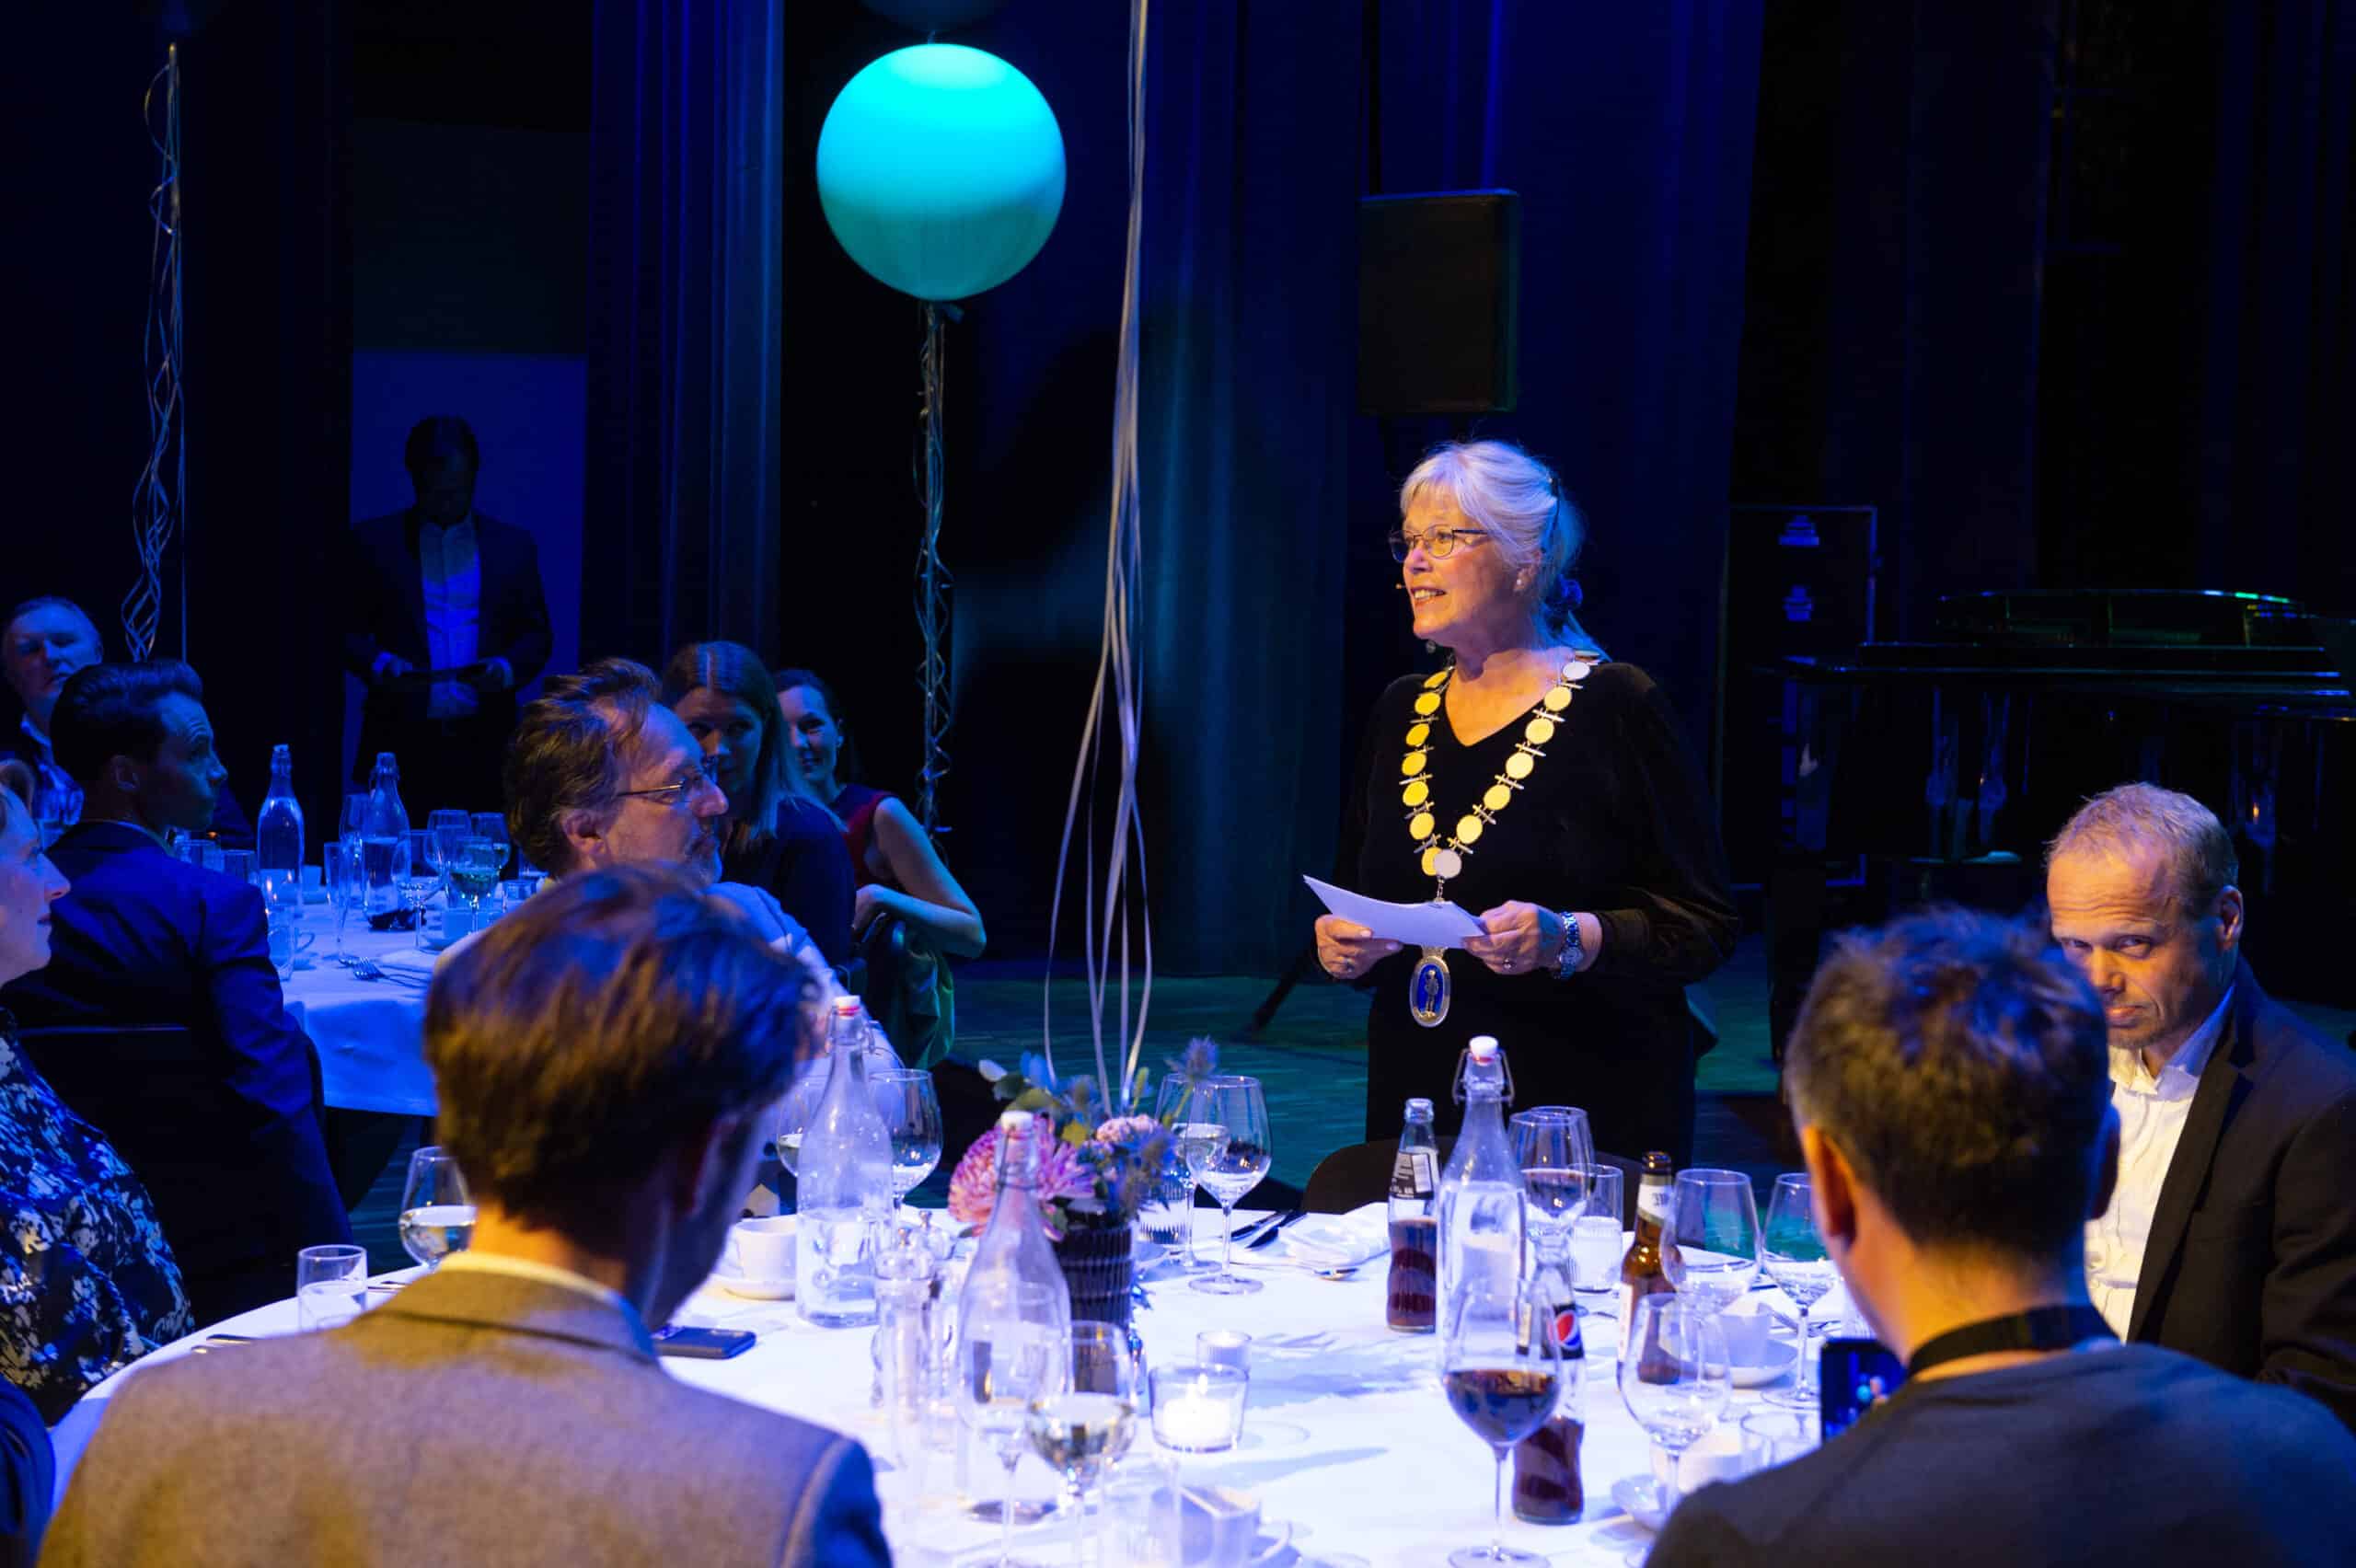 The Halden mayor Anne-Kari Holm (Sp) gave e a warm welcome in the conference dinner opening speech. PHOTO: Stein Johnsen, Contentvideo.no